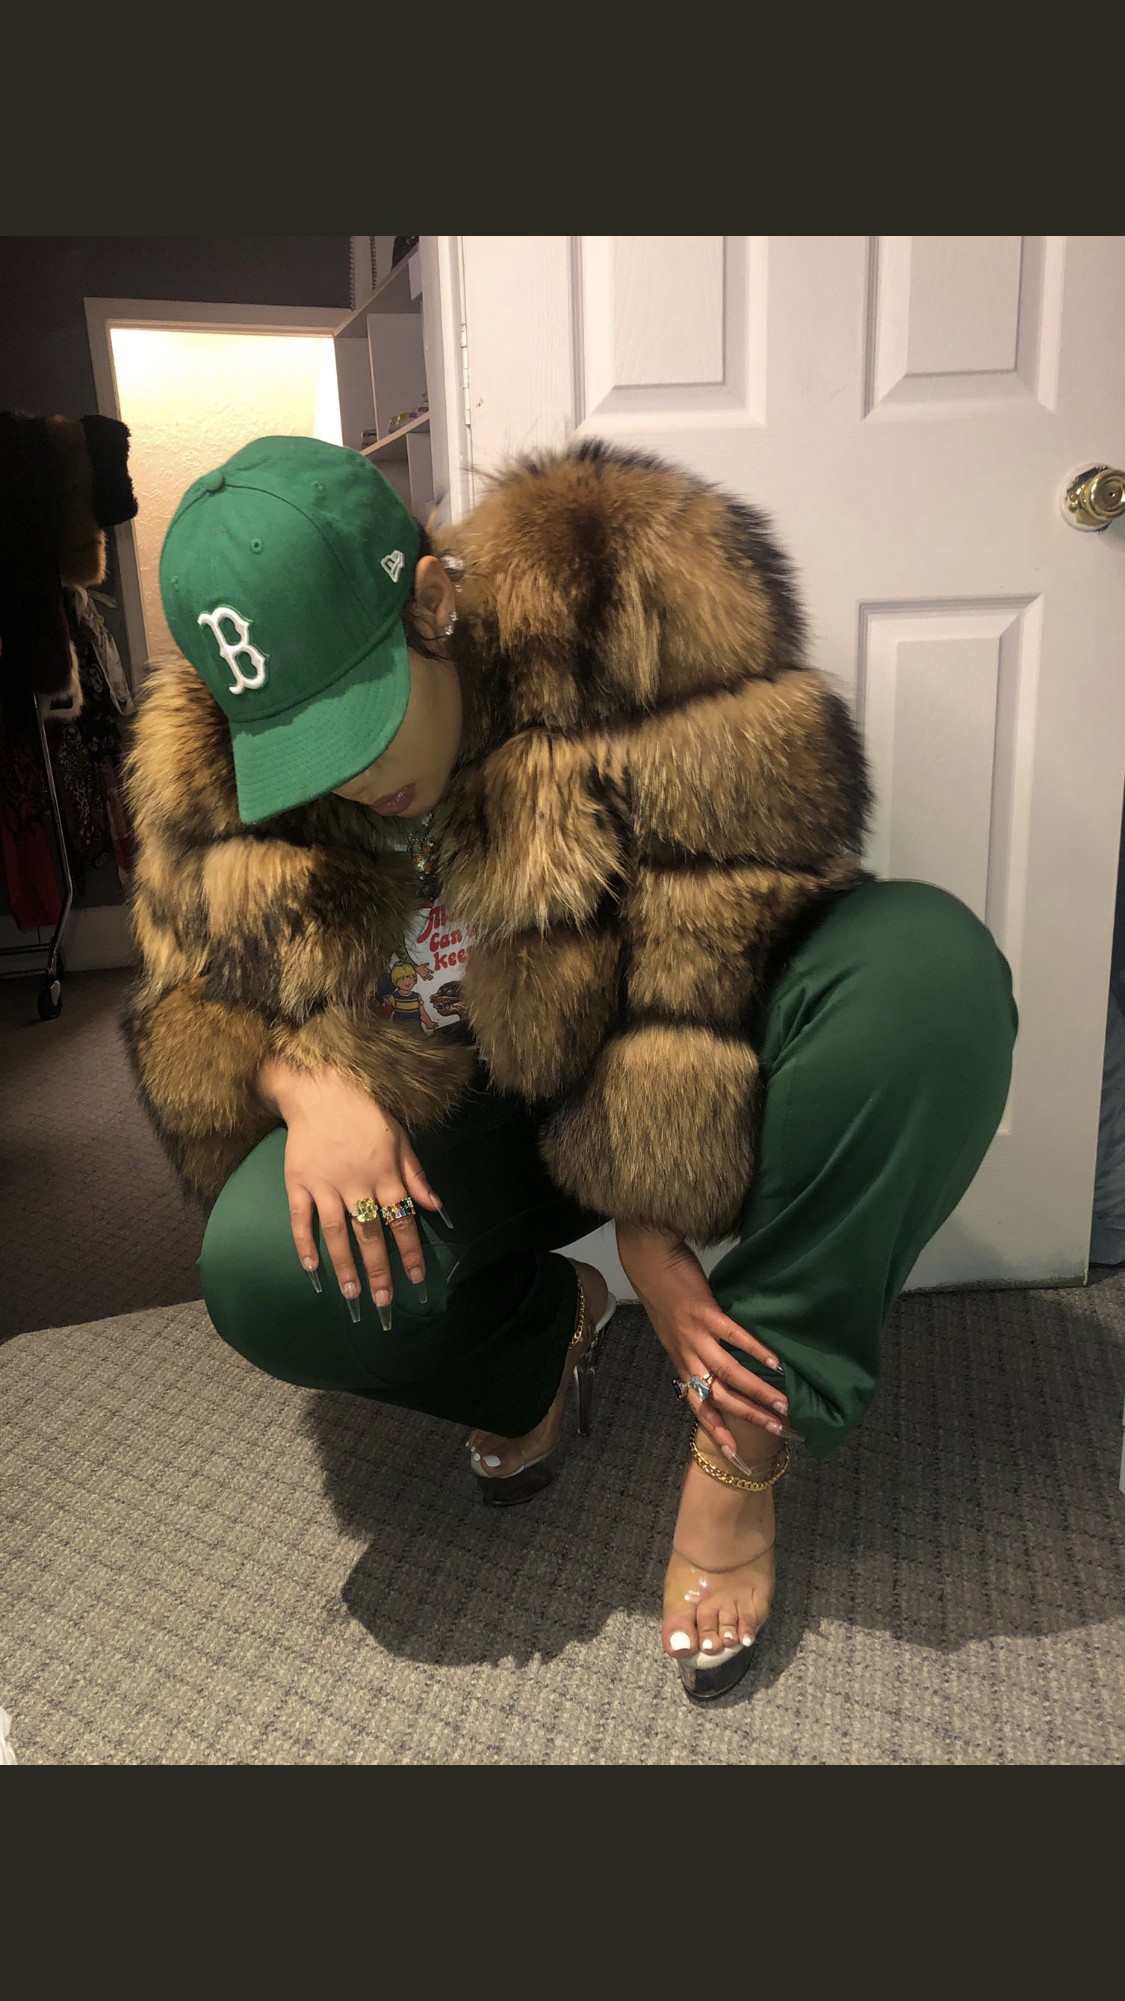 Outfits With Green Pants, Fur clothing, Fake fur: winter outfits,  Fur clothing,  Fake fur,  Green Pant Outfits  